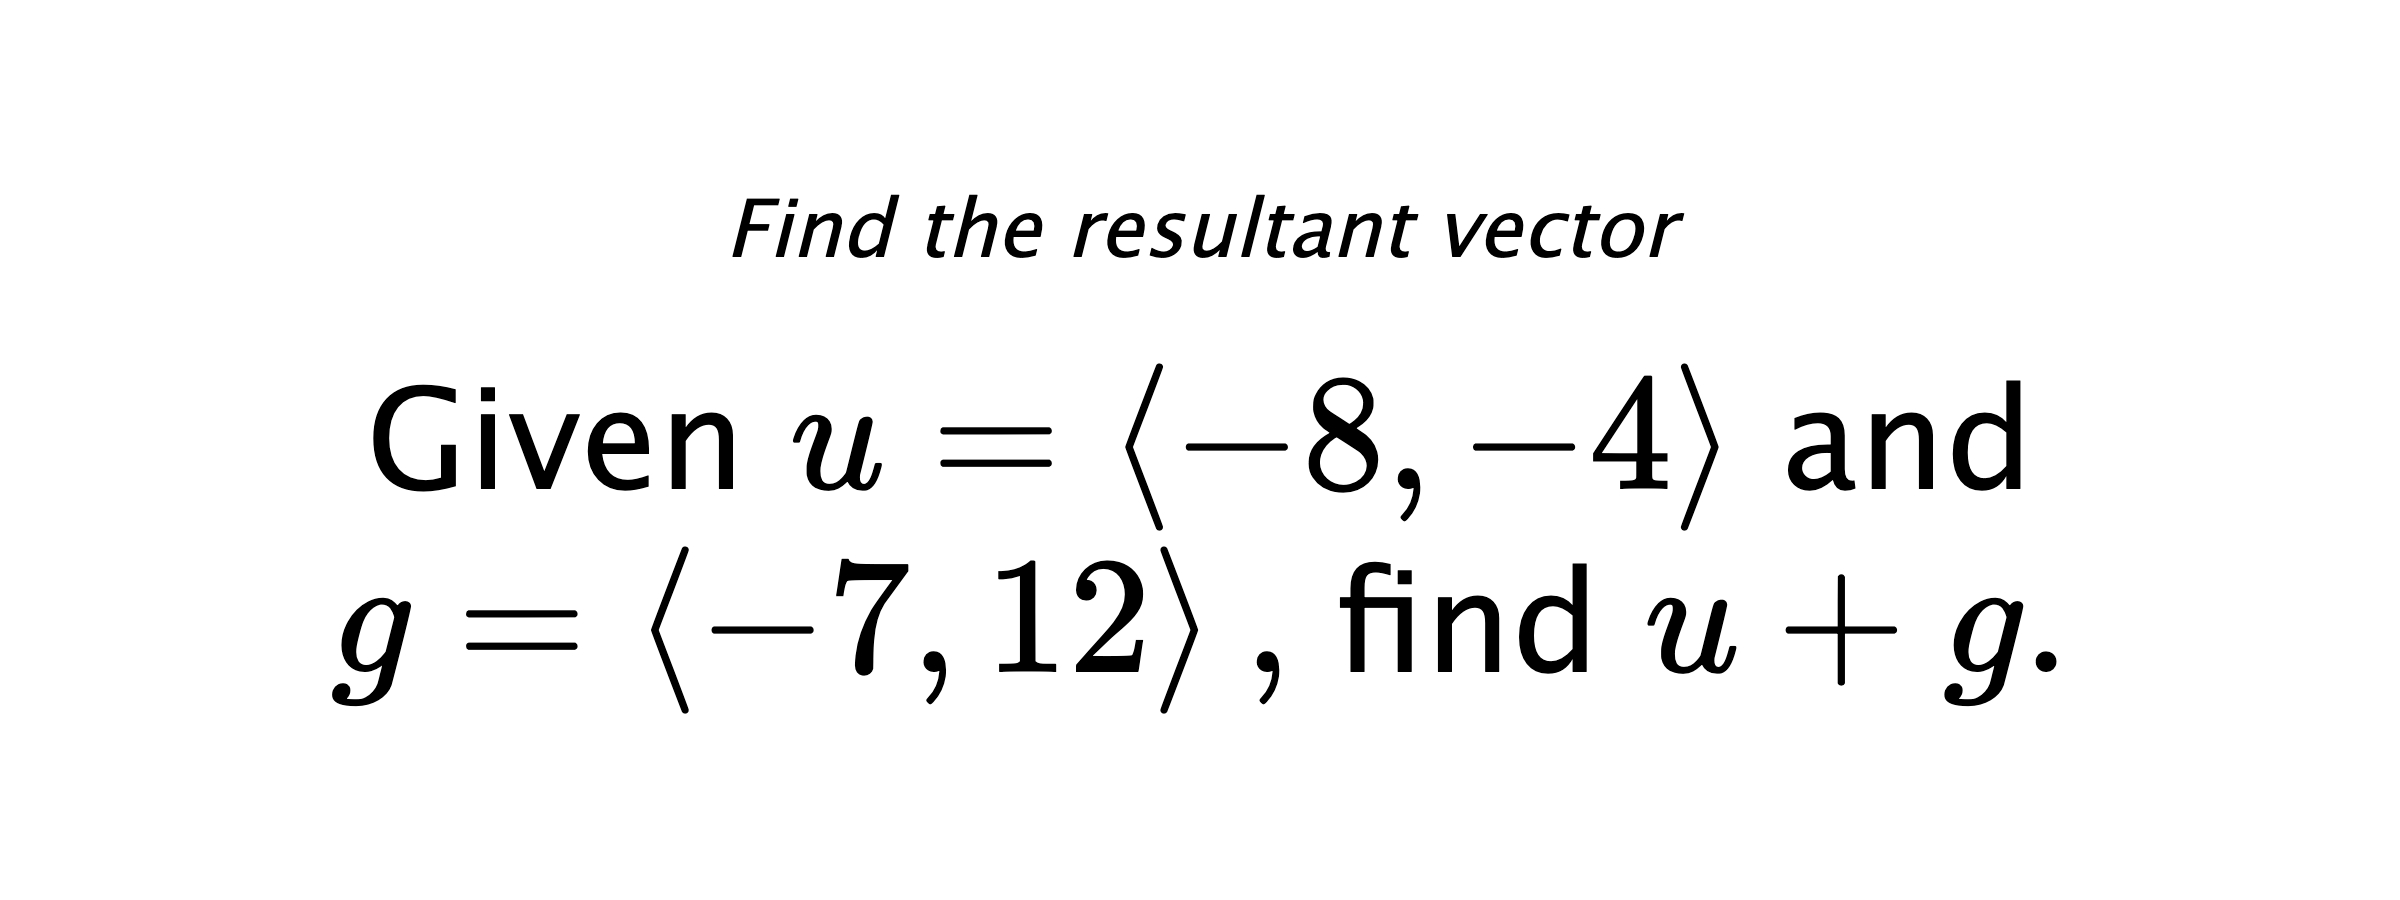 Find the resultant vector Given $ u = \left< -8,-4 \right> $ and $ g = \left< -7,12 \right> ,$ find $ u+g .$